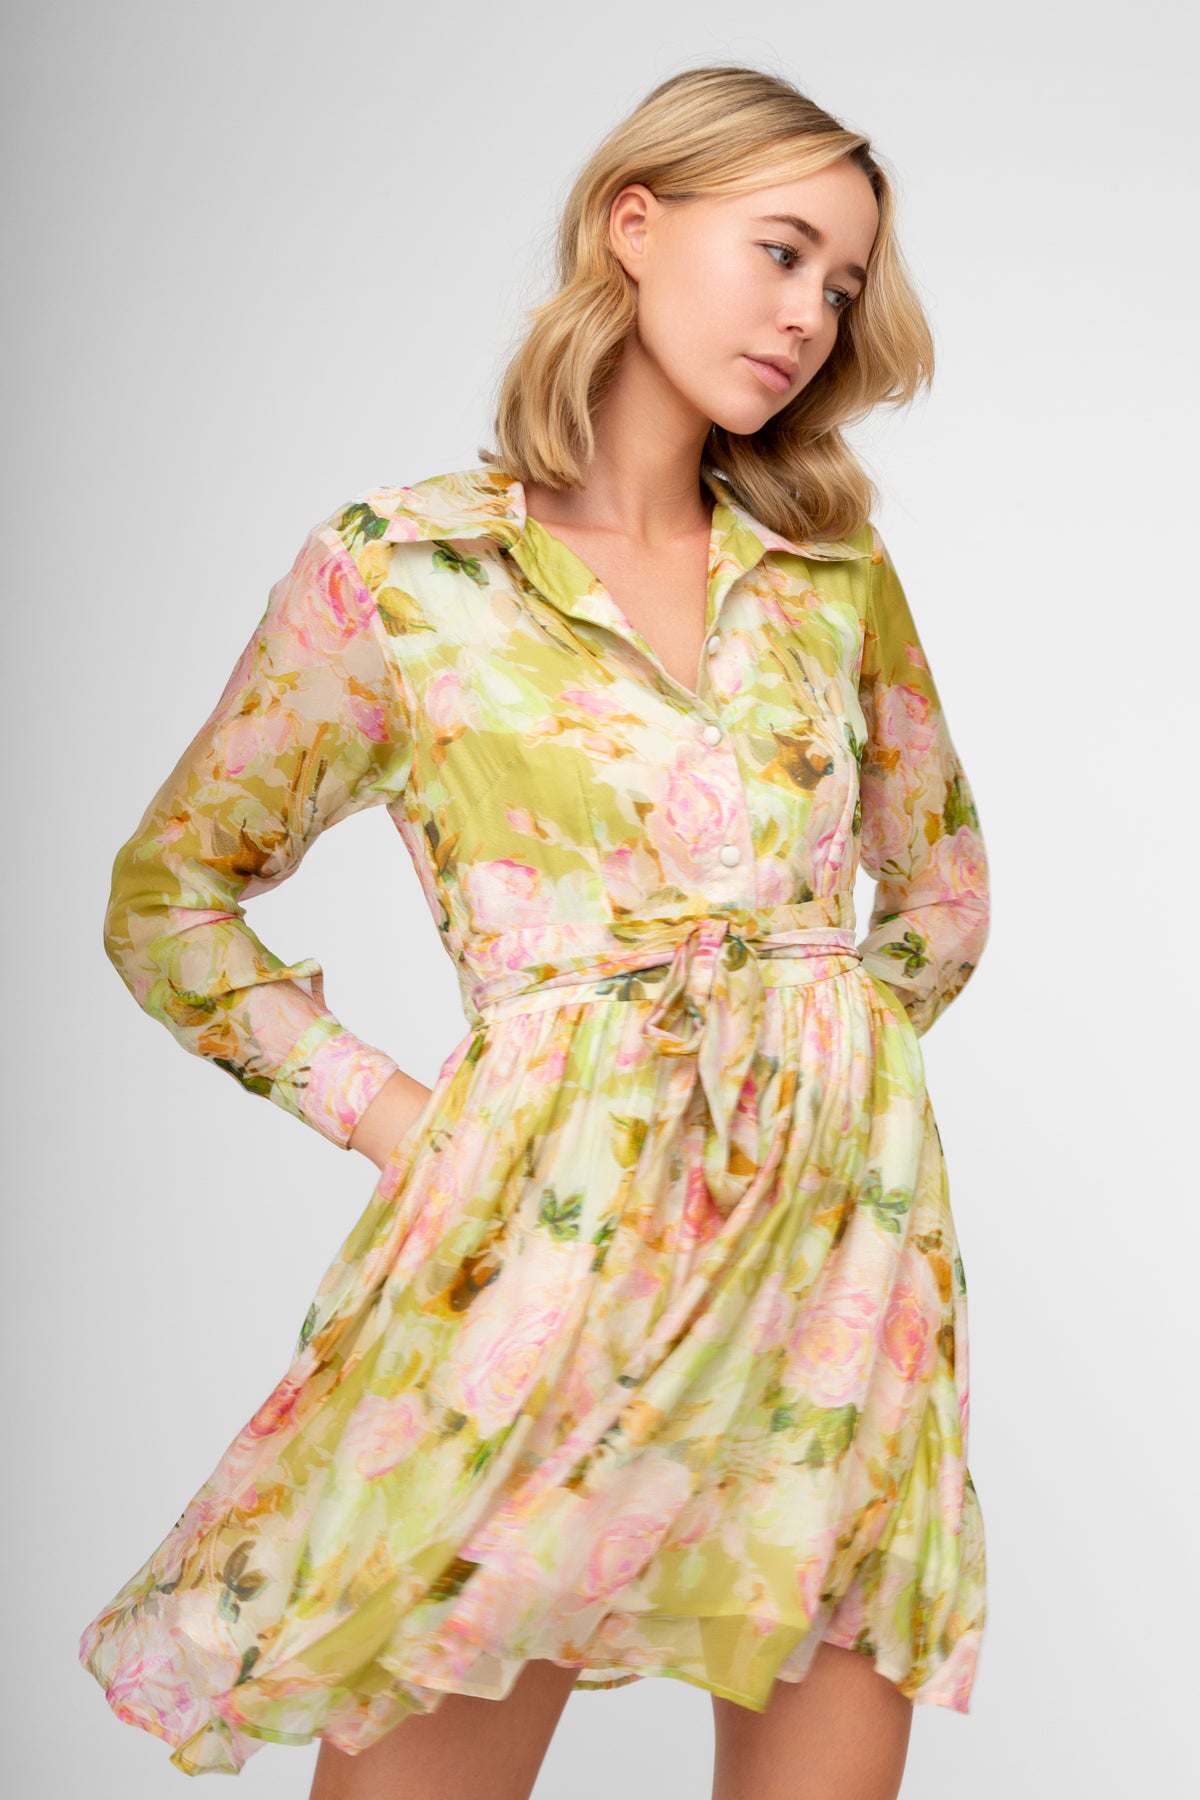 Zelly Floral Dress White / Pink Green Yellow Floral